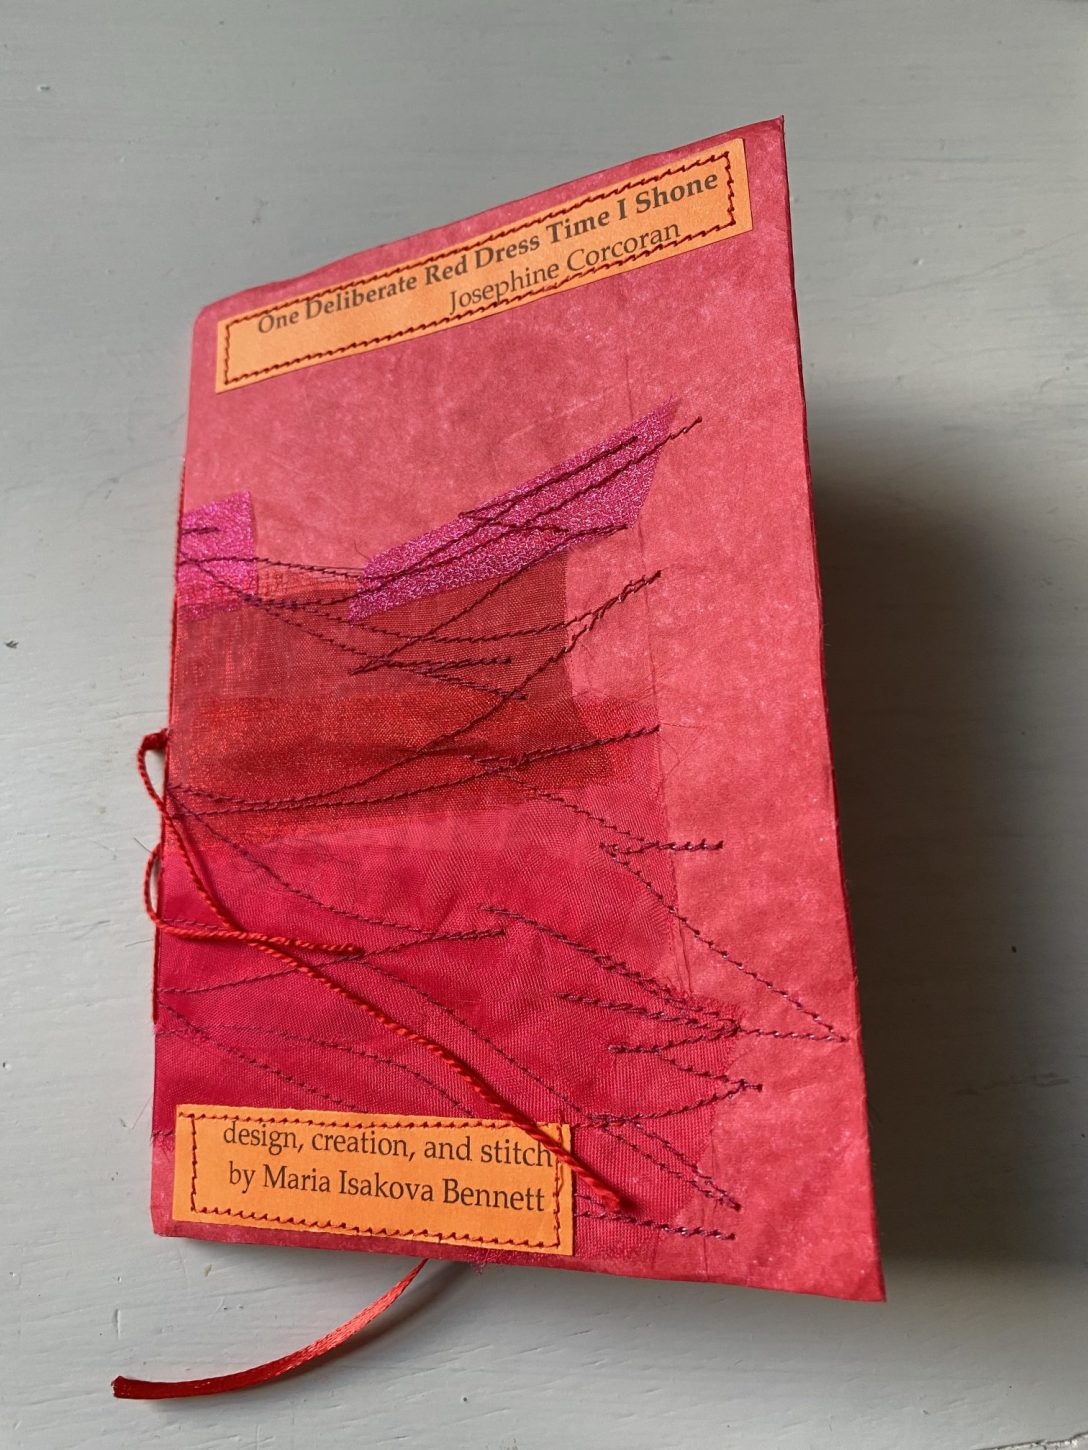 Close up of handstitched red-covered pamphlet 'One Deliberate Red Dress Time I Shone' by Josephine Corcoran. Text reads 'design, creation, and stitch by Maria Isakova Bennett